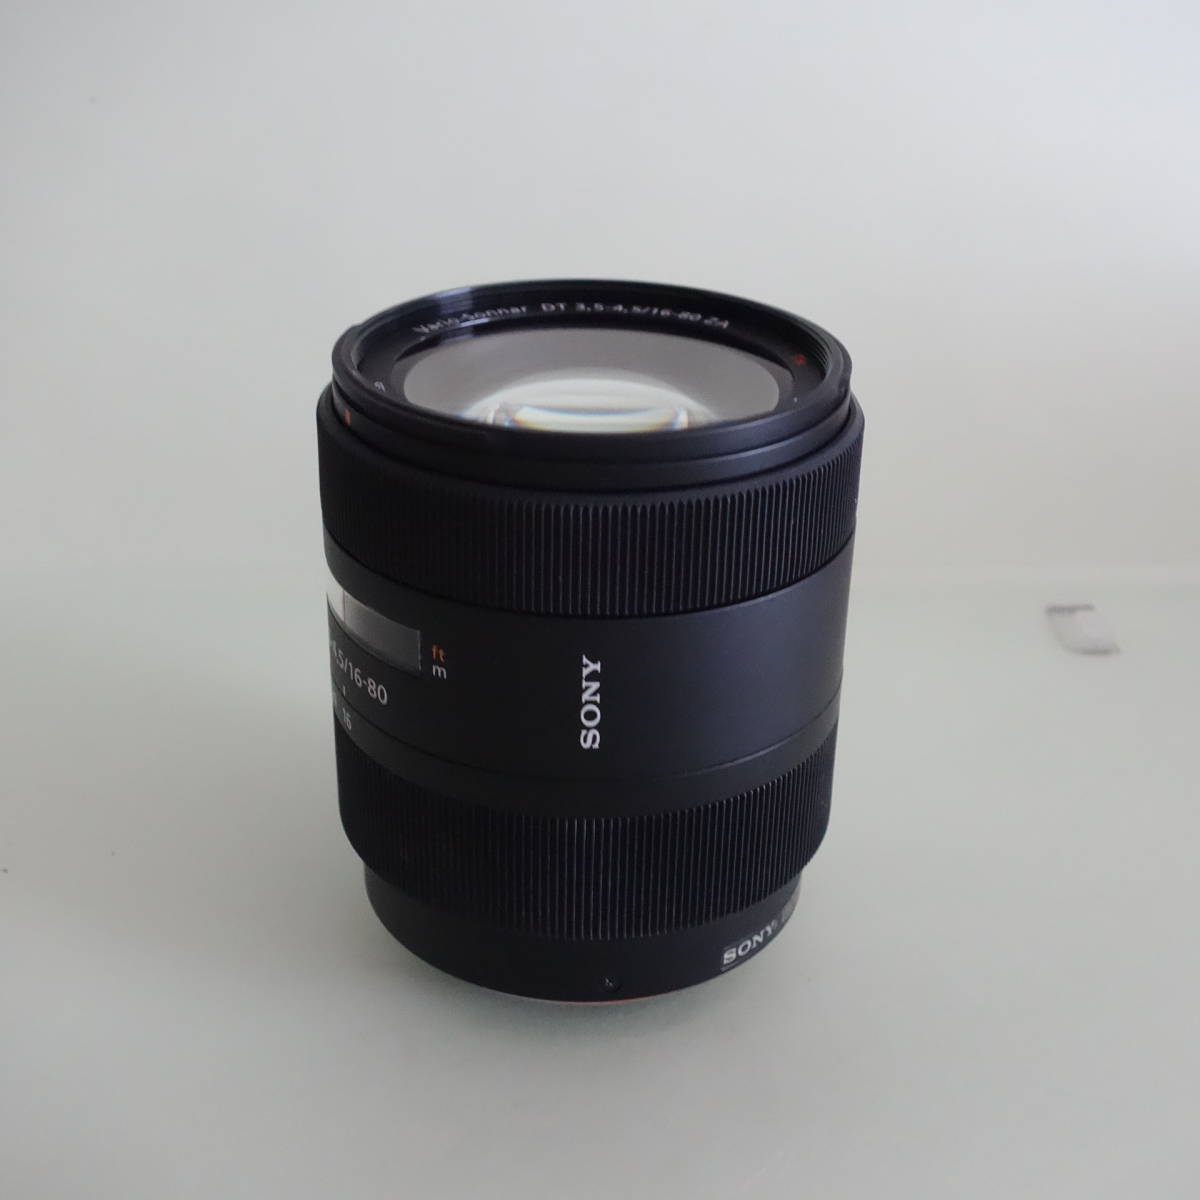 SONY SAL1680Z* accessory complete set equipped *16-80mm F3.5-4.5 Carl Zeiss Vario-Sonnar T* Carl Zeiss lens 